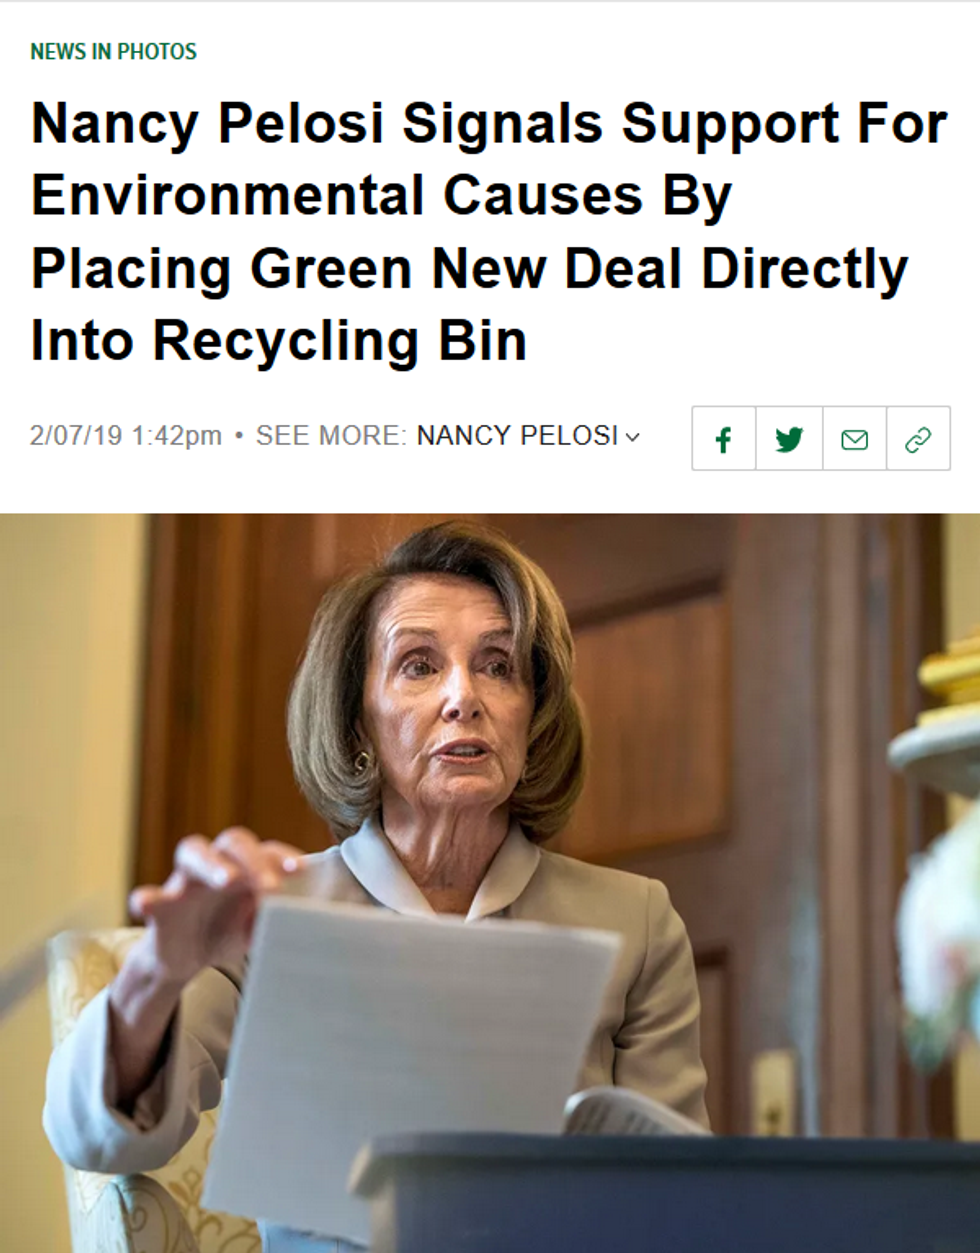 Onion: Nancy Pelosi Signals Support For Environmental Causes By Placing Green New Deal Directly Into Recycling Bin